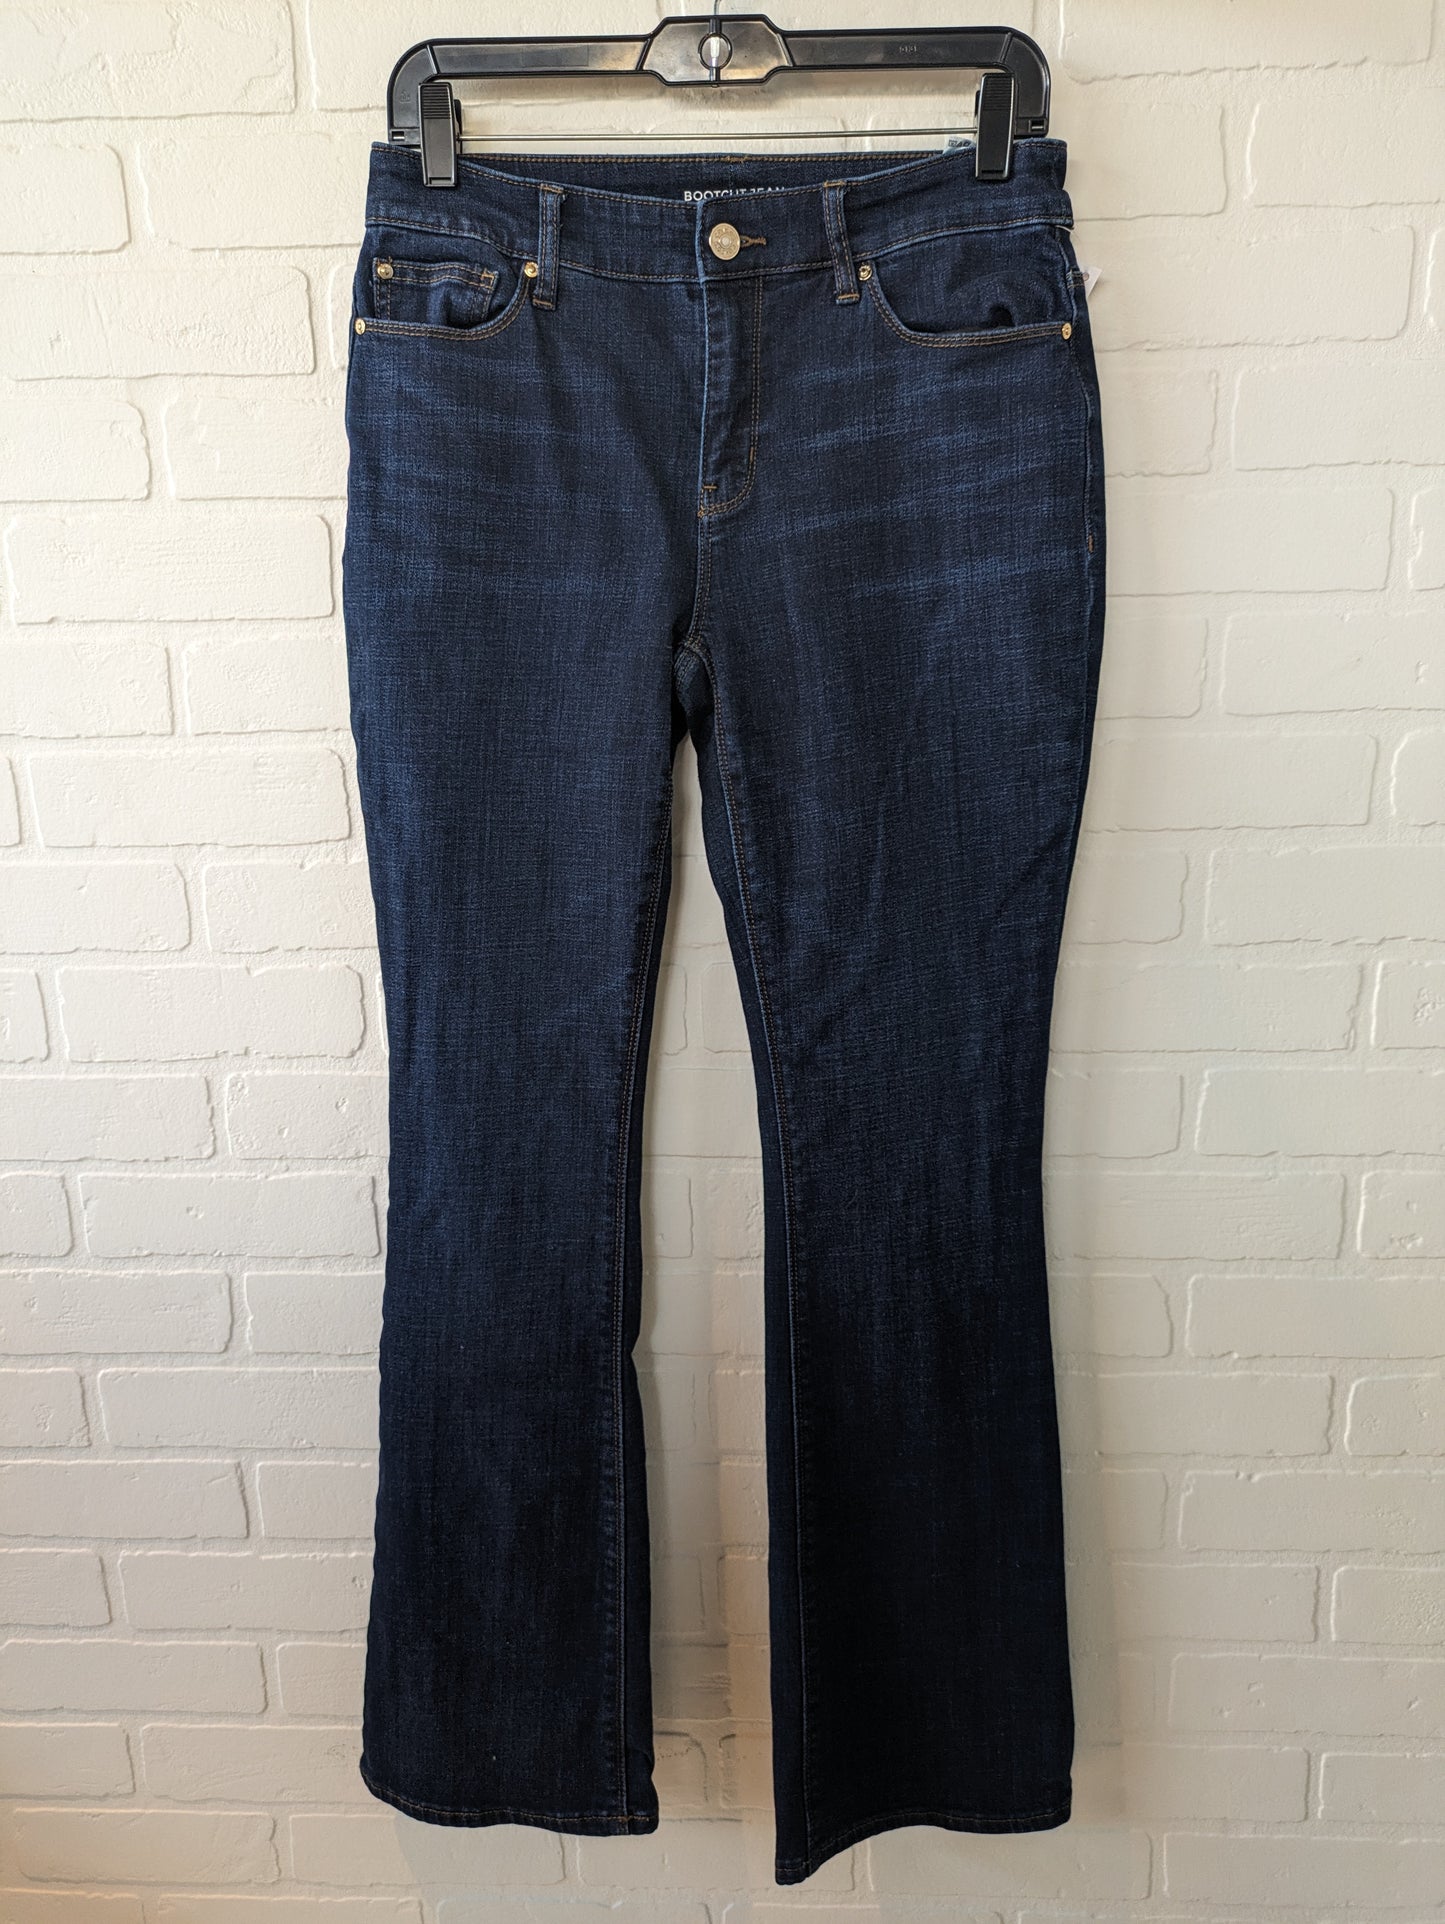 Jeans Boot Cut By Chicos  Size: 2